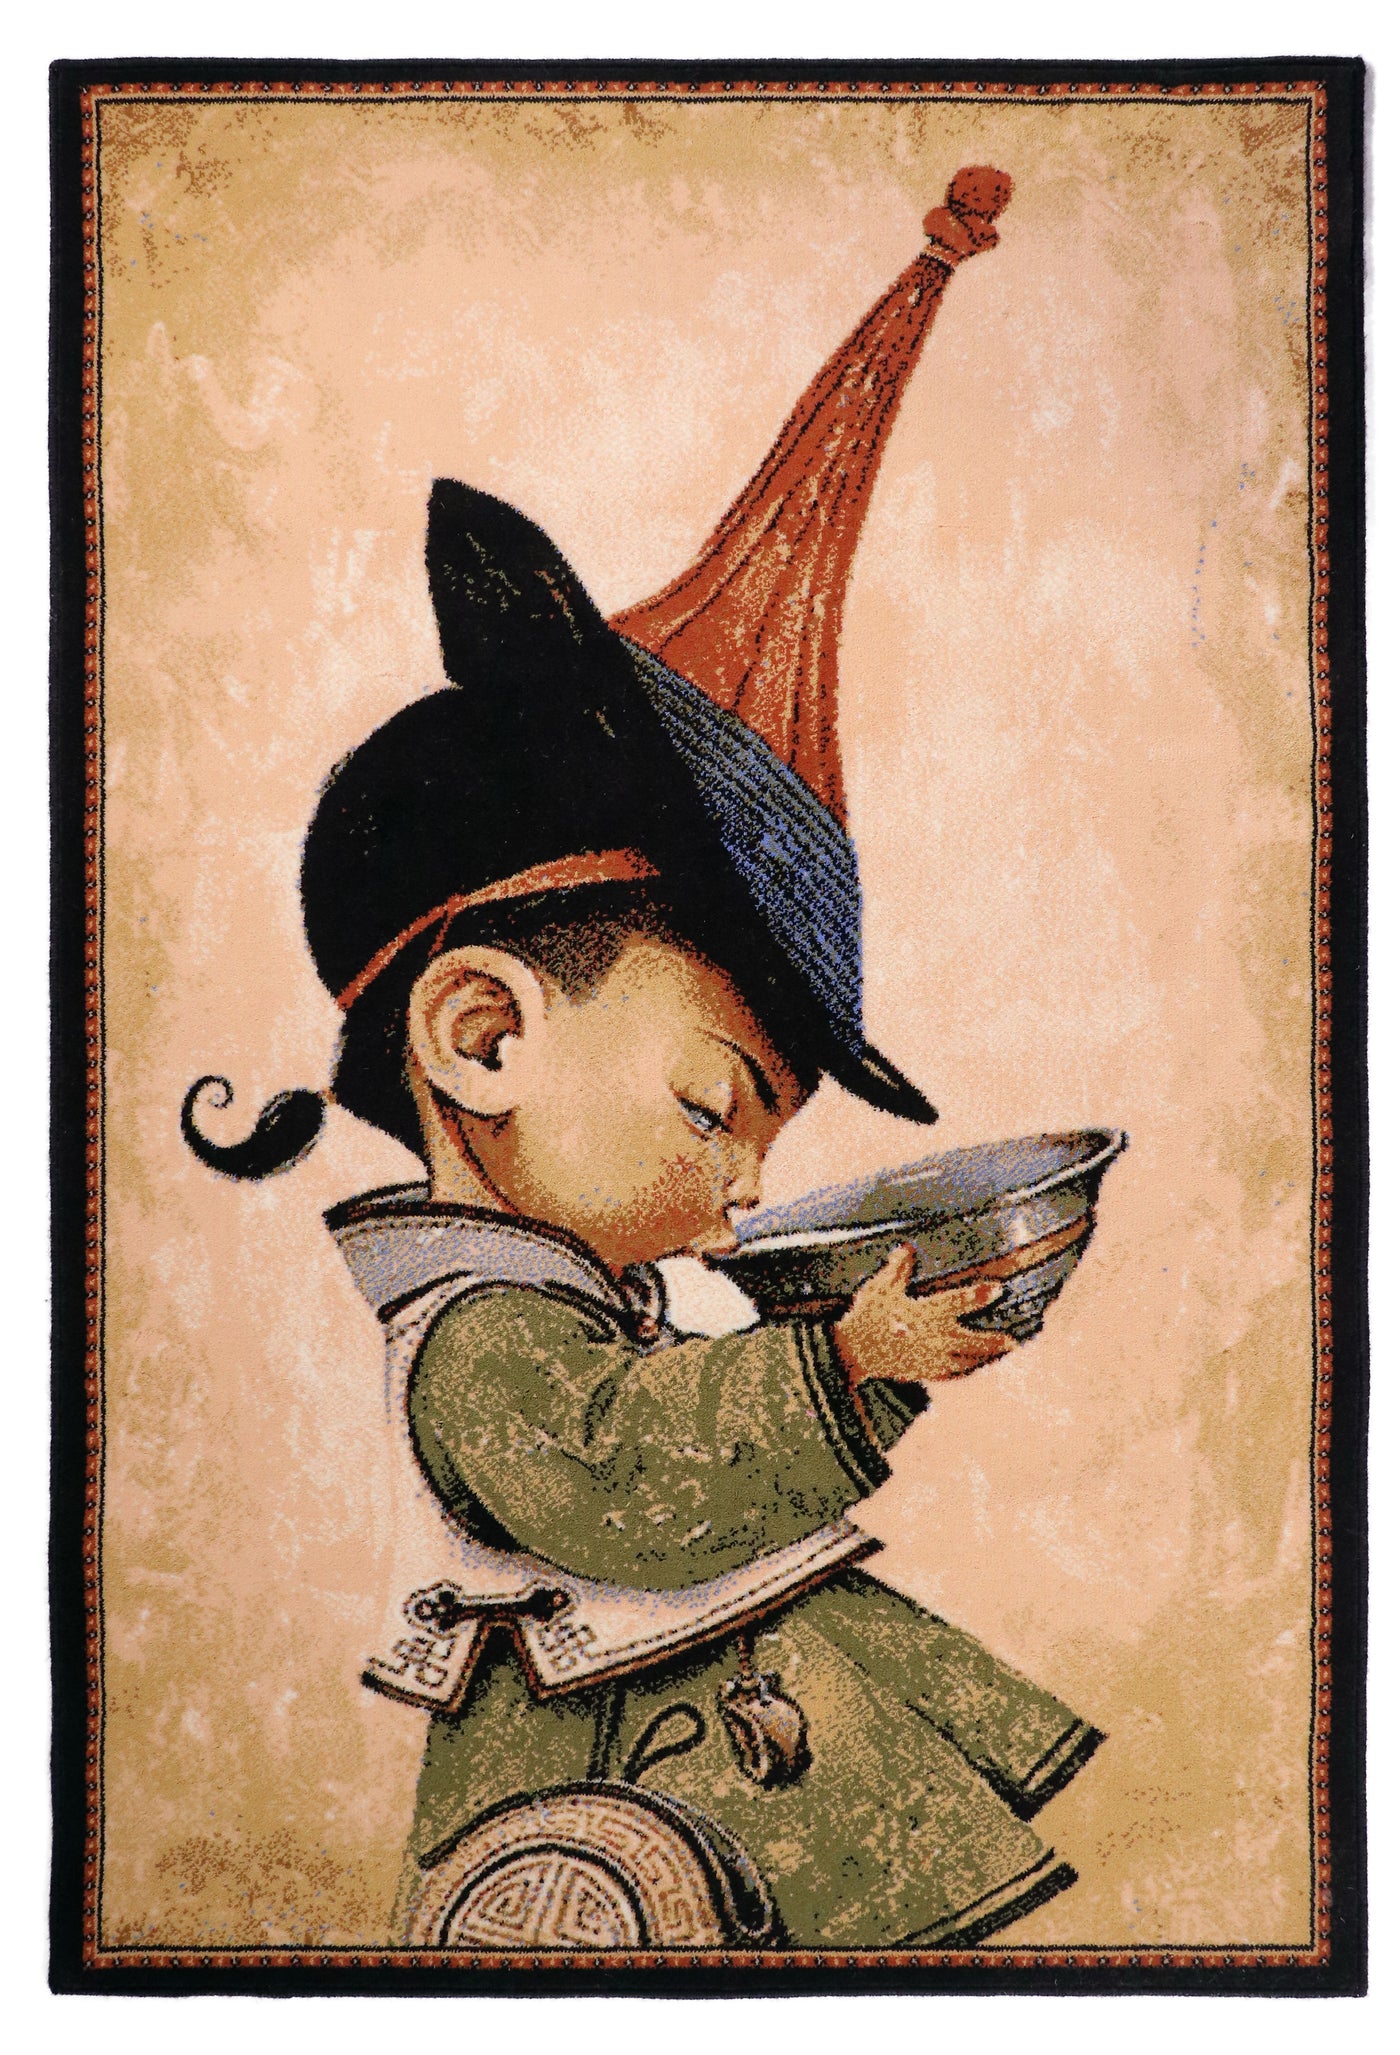 Traditional East Asian illustration of a young child in historical attire, wearing a tall red hat and green robe, holding and drinking from a bow